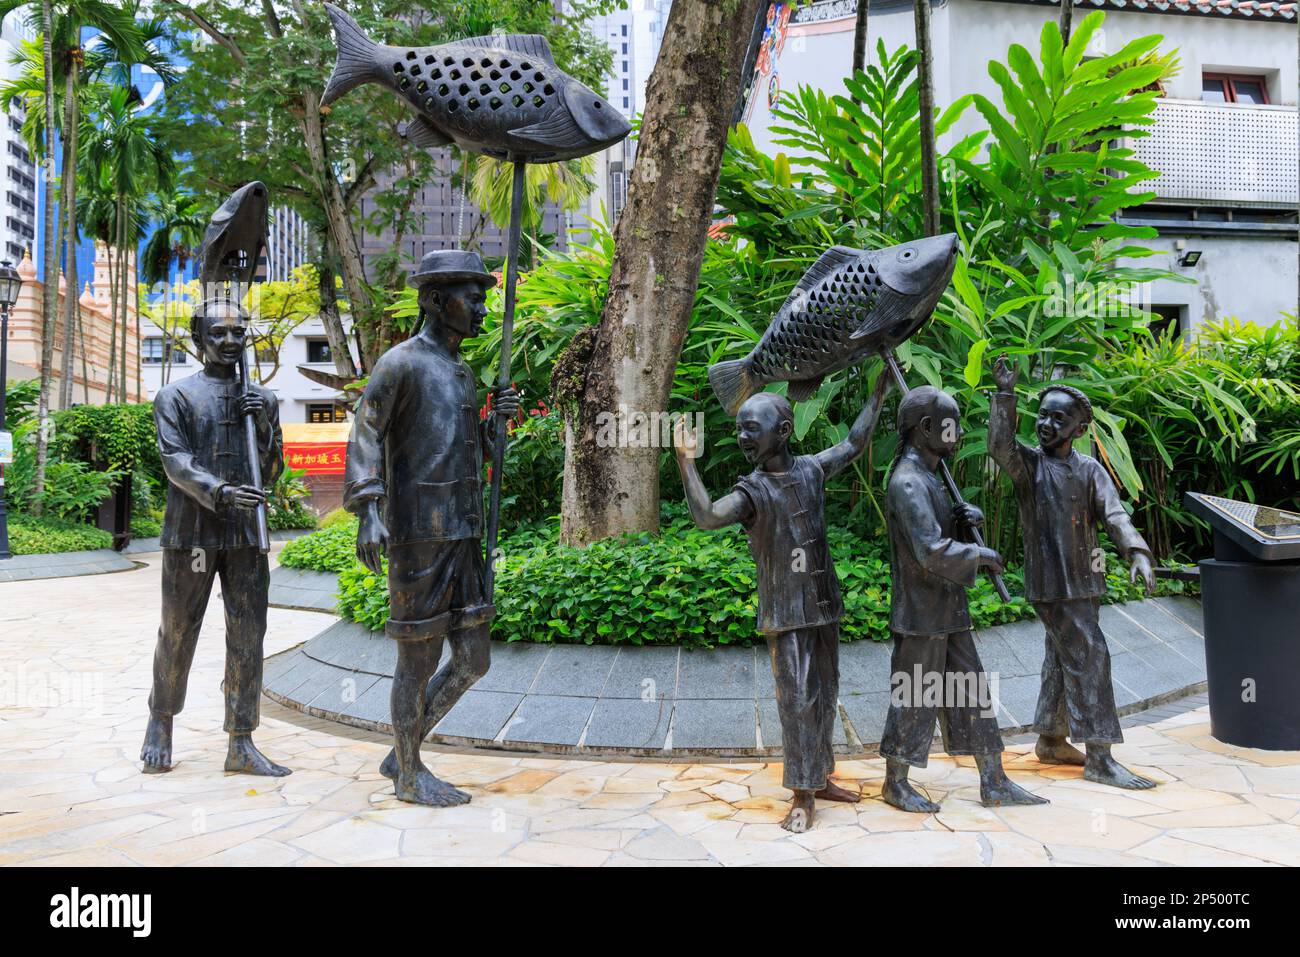 Sculpture depicting the festival activities of early Chinese immigrants in Singapore, Telok Ayer Green, Singapore Stock Photo